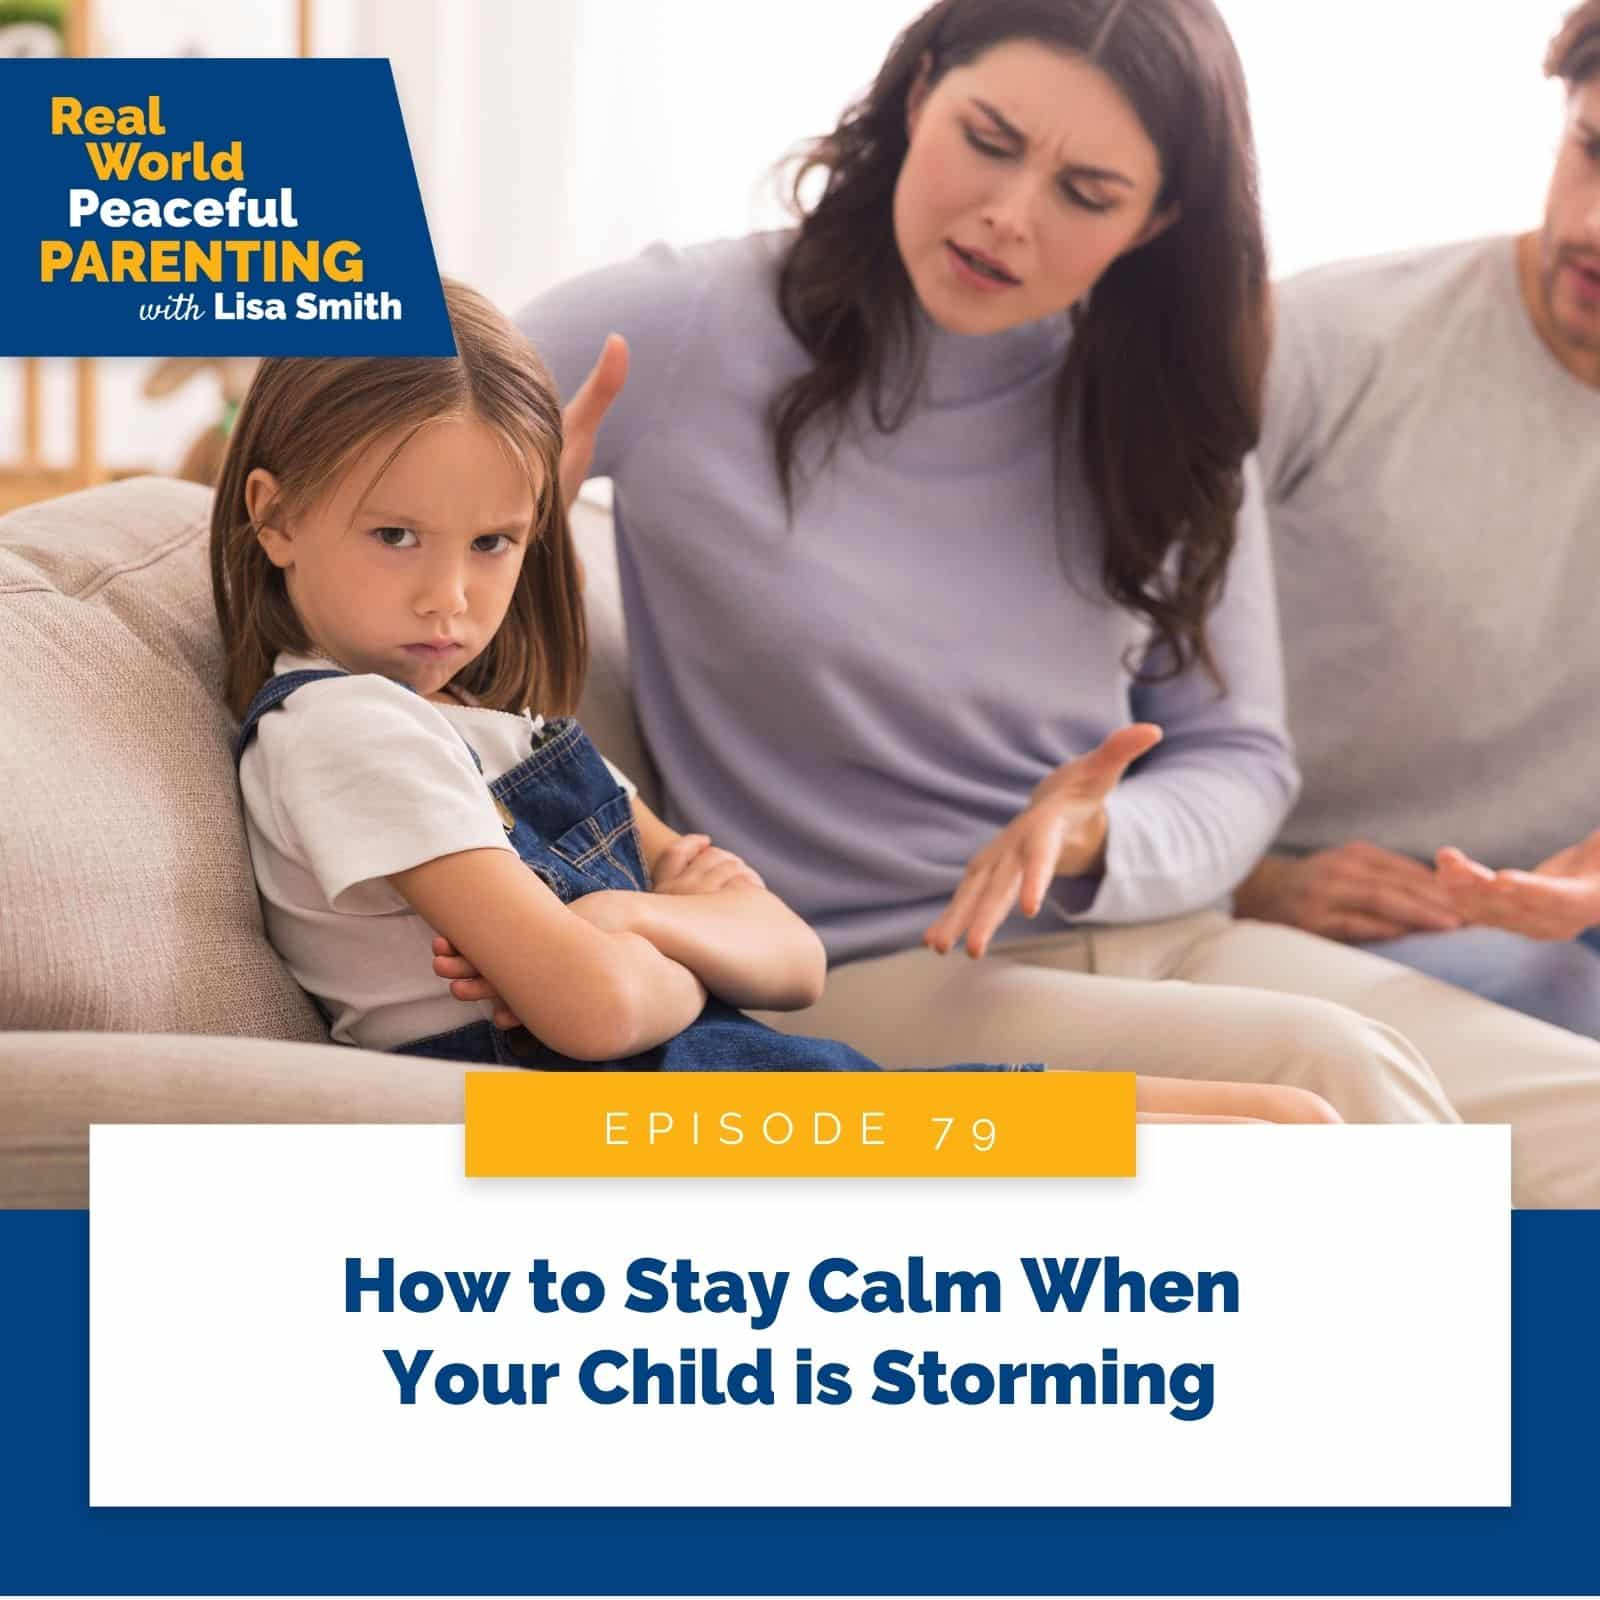 Real World Peaceful Parenting | How to Stay Calm When Your Child is Storming